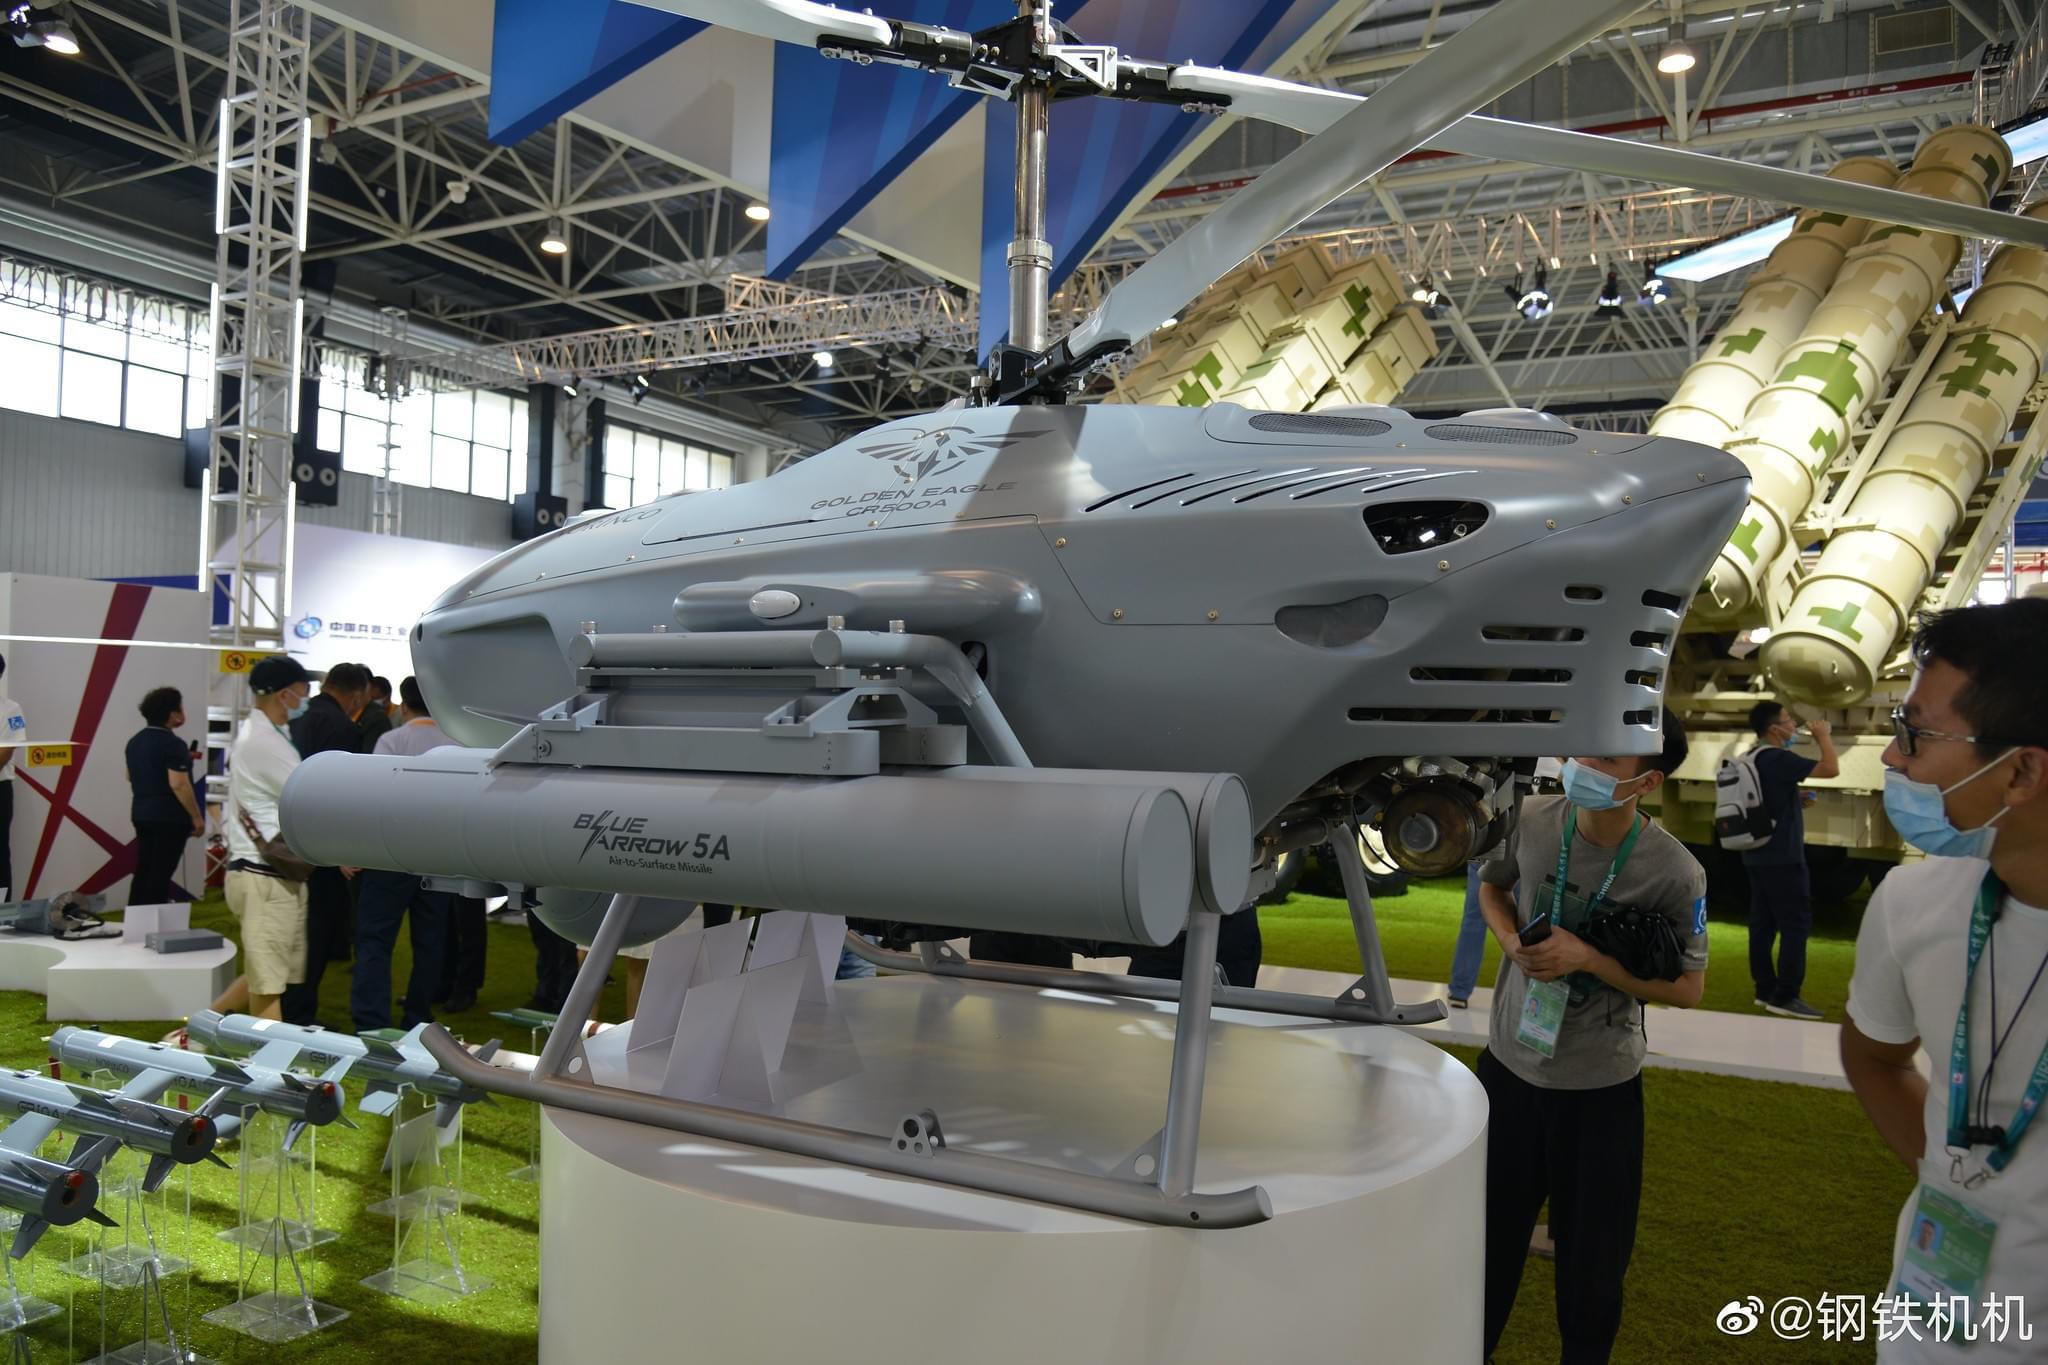 cr500a-uav-in-mass-production-for-the-pla-weight-500kgs-v0-ekmby4gnu00a1.jpg